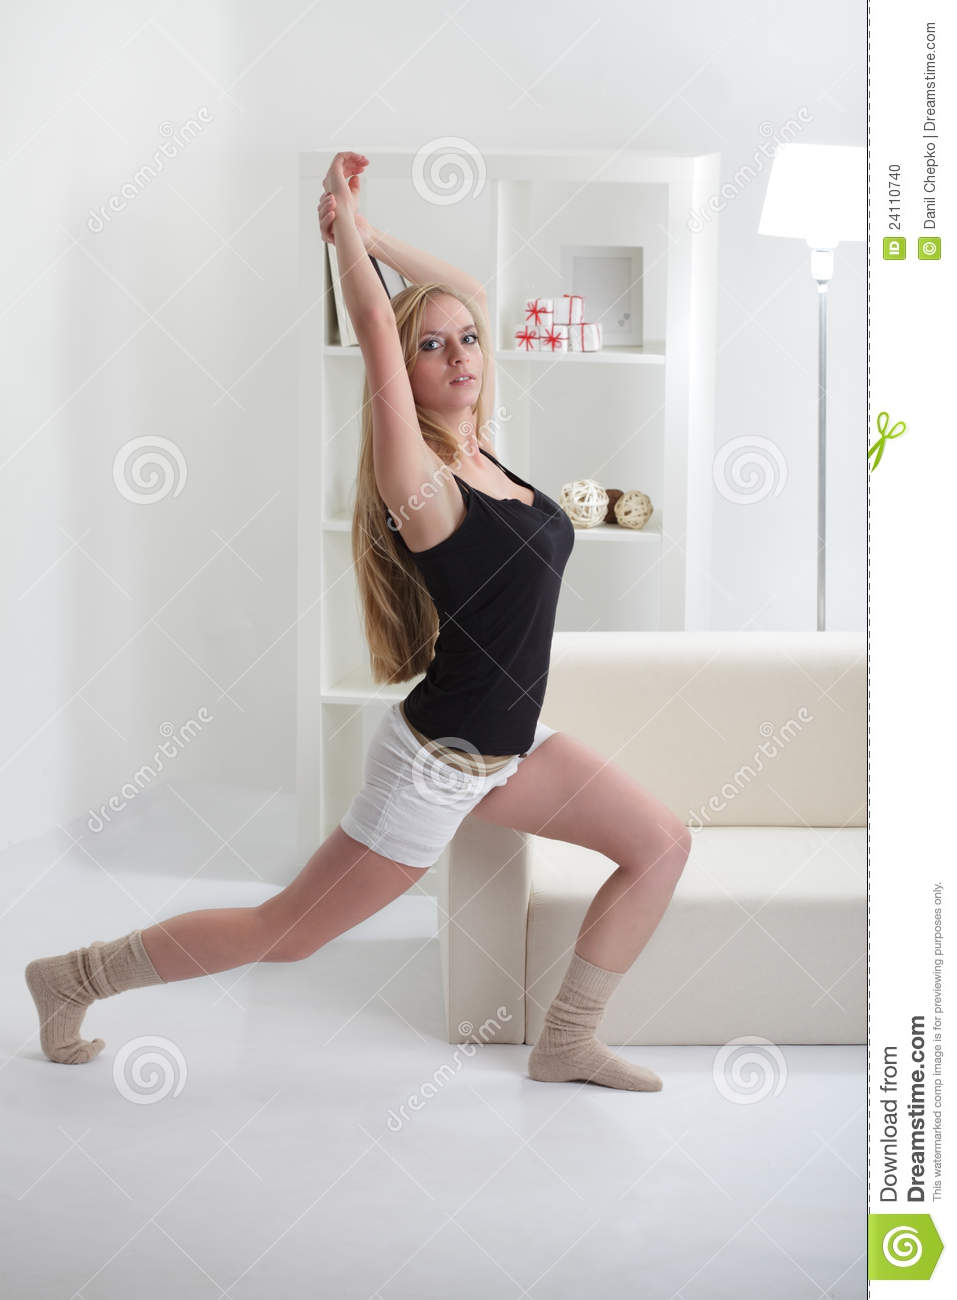 Girl Stretching Muscles Stock Photo   Image  24110740